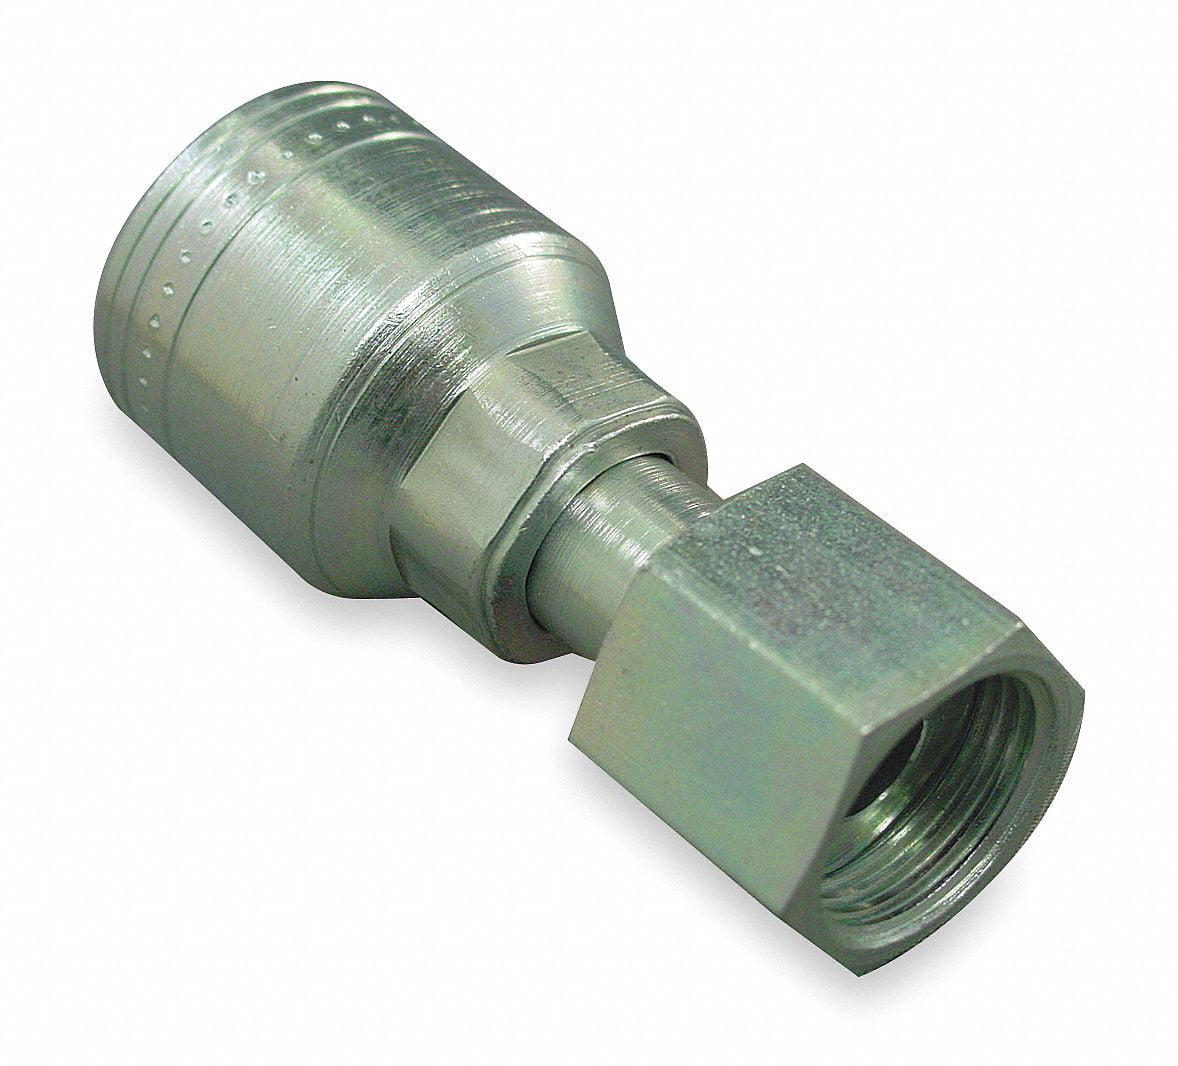 Fitting Material Steel x Steel Hydraulic Crimp Fitting Fitting Size 13/16 x 1/2